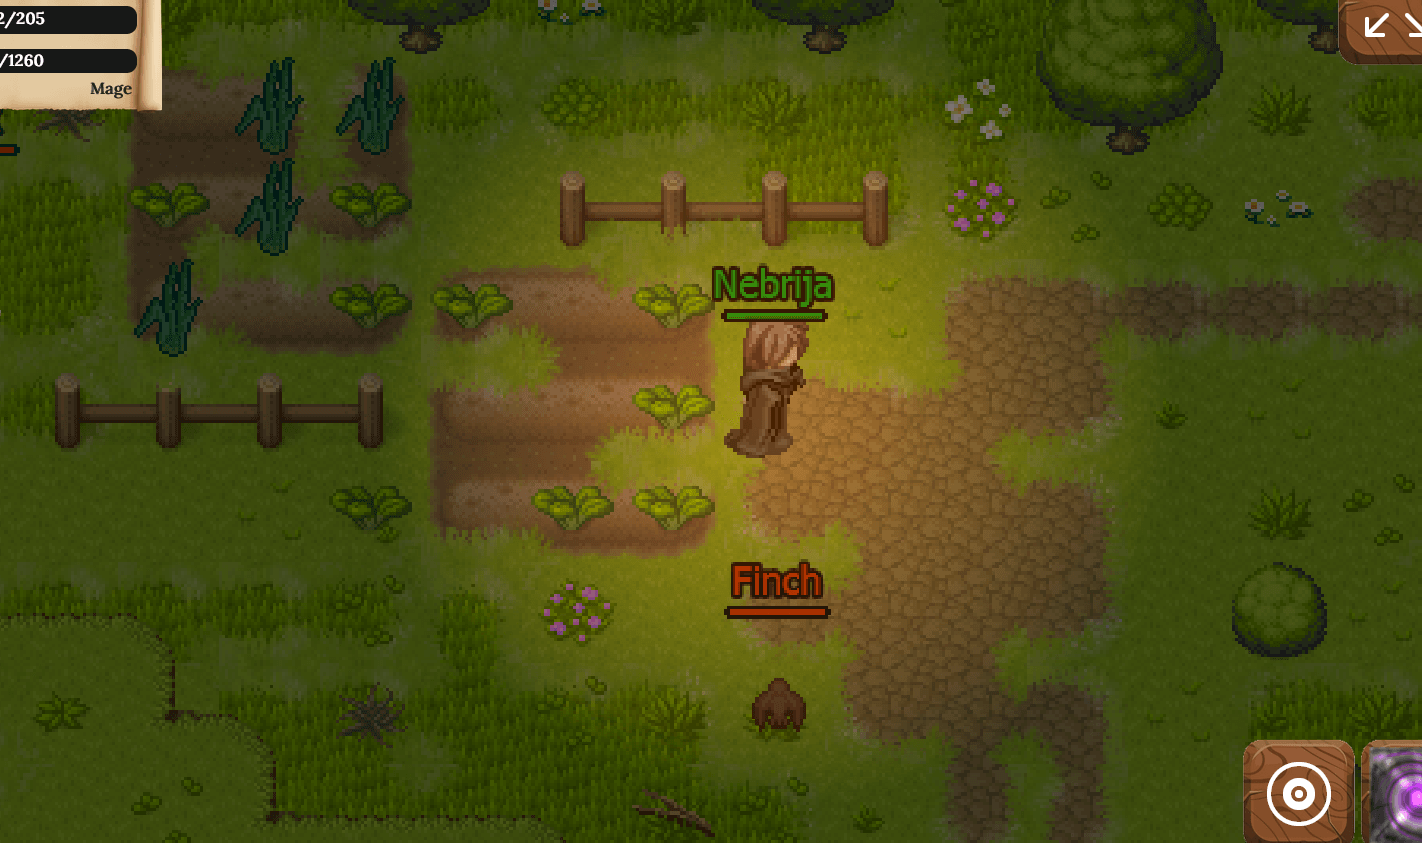 herodonia-mobile-rpg-game-2023-free-to-play-terrain-map-changes